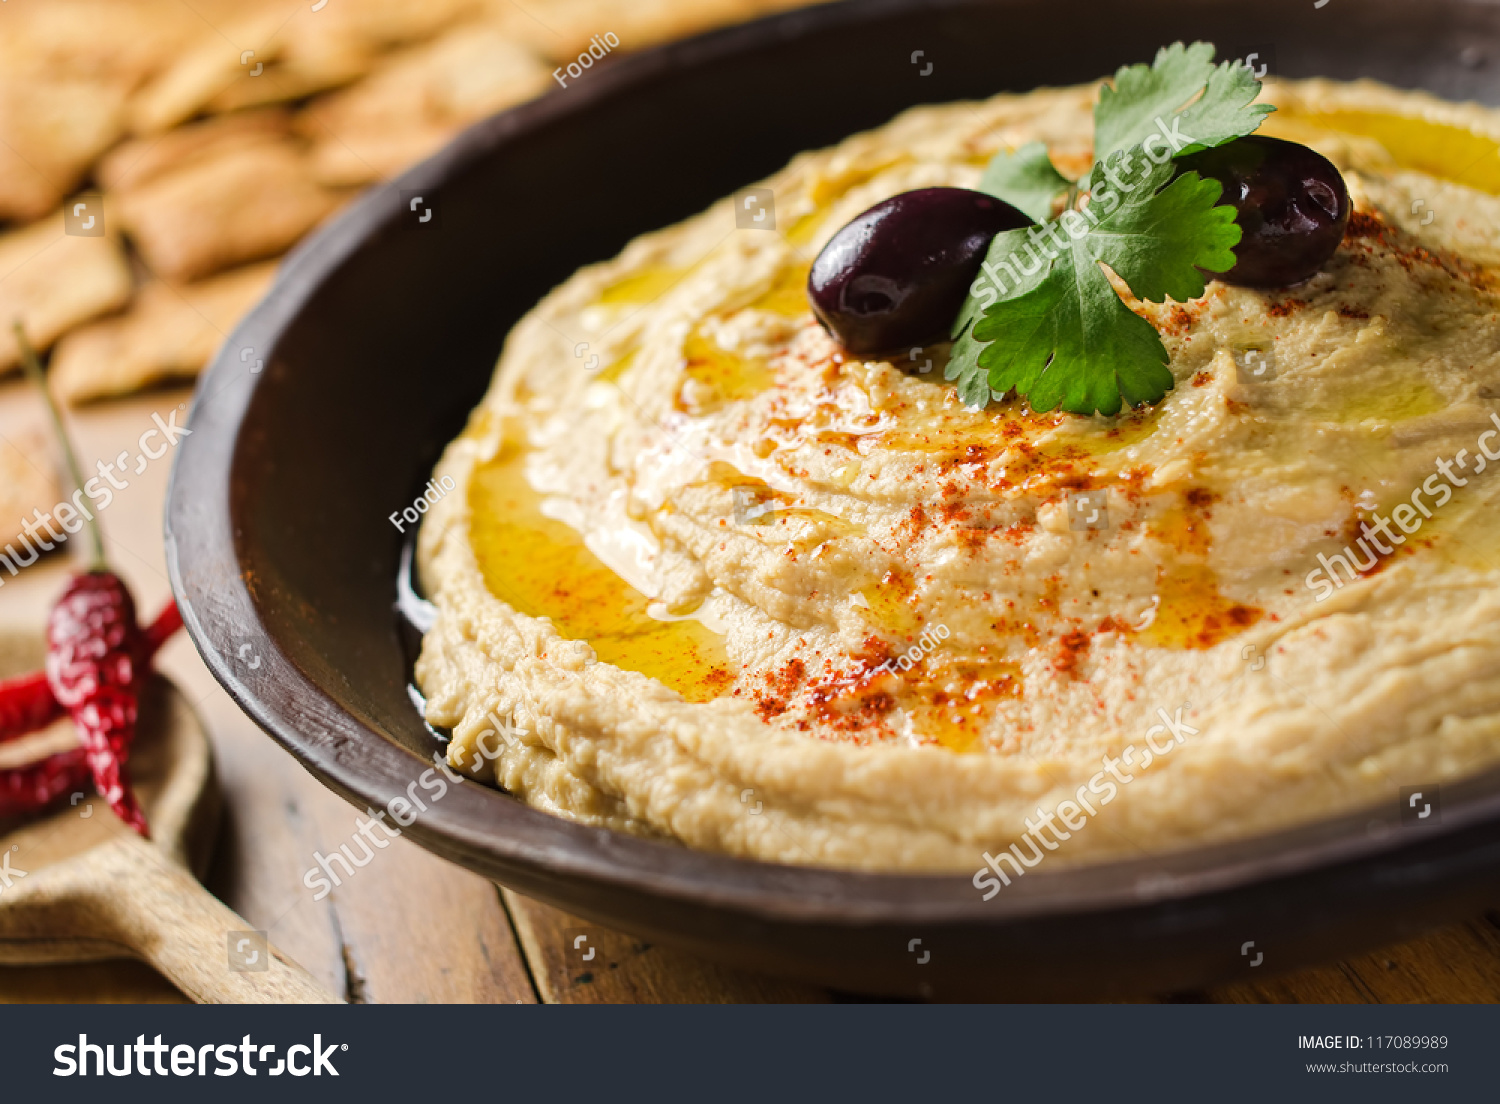 A bowl of creamy hummus with olive oil and pita chips. #117089989